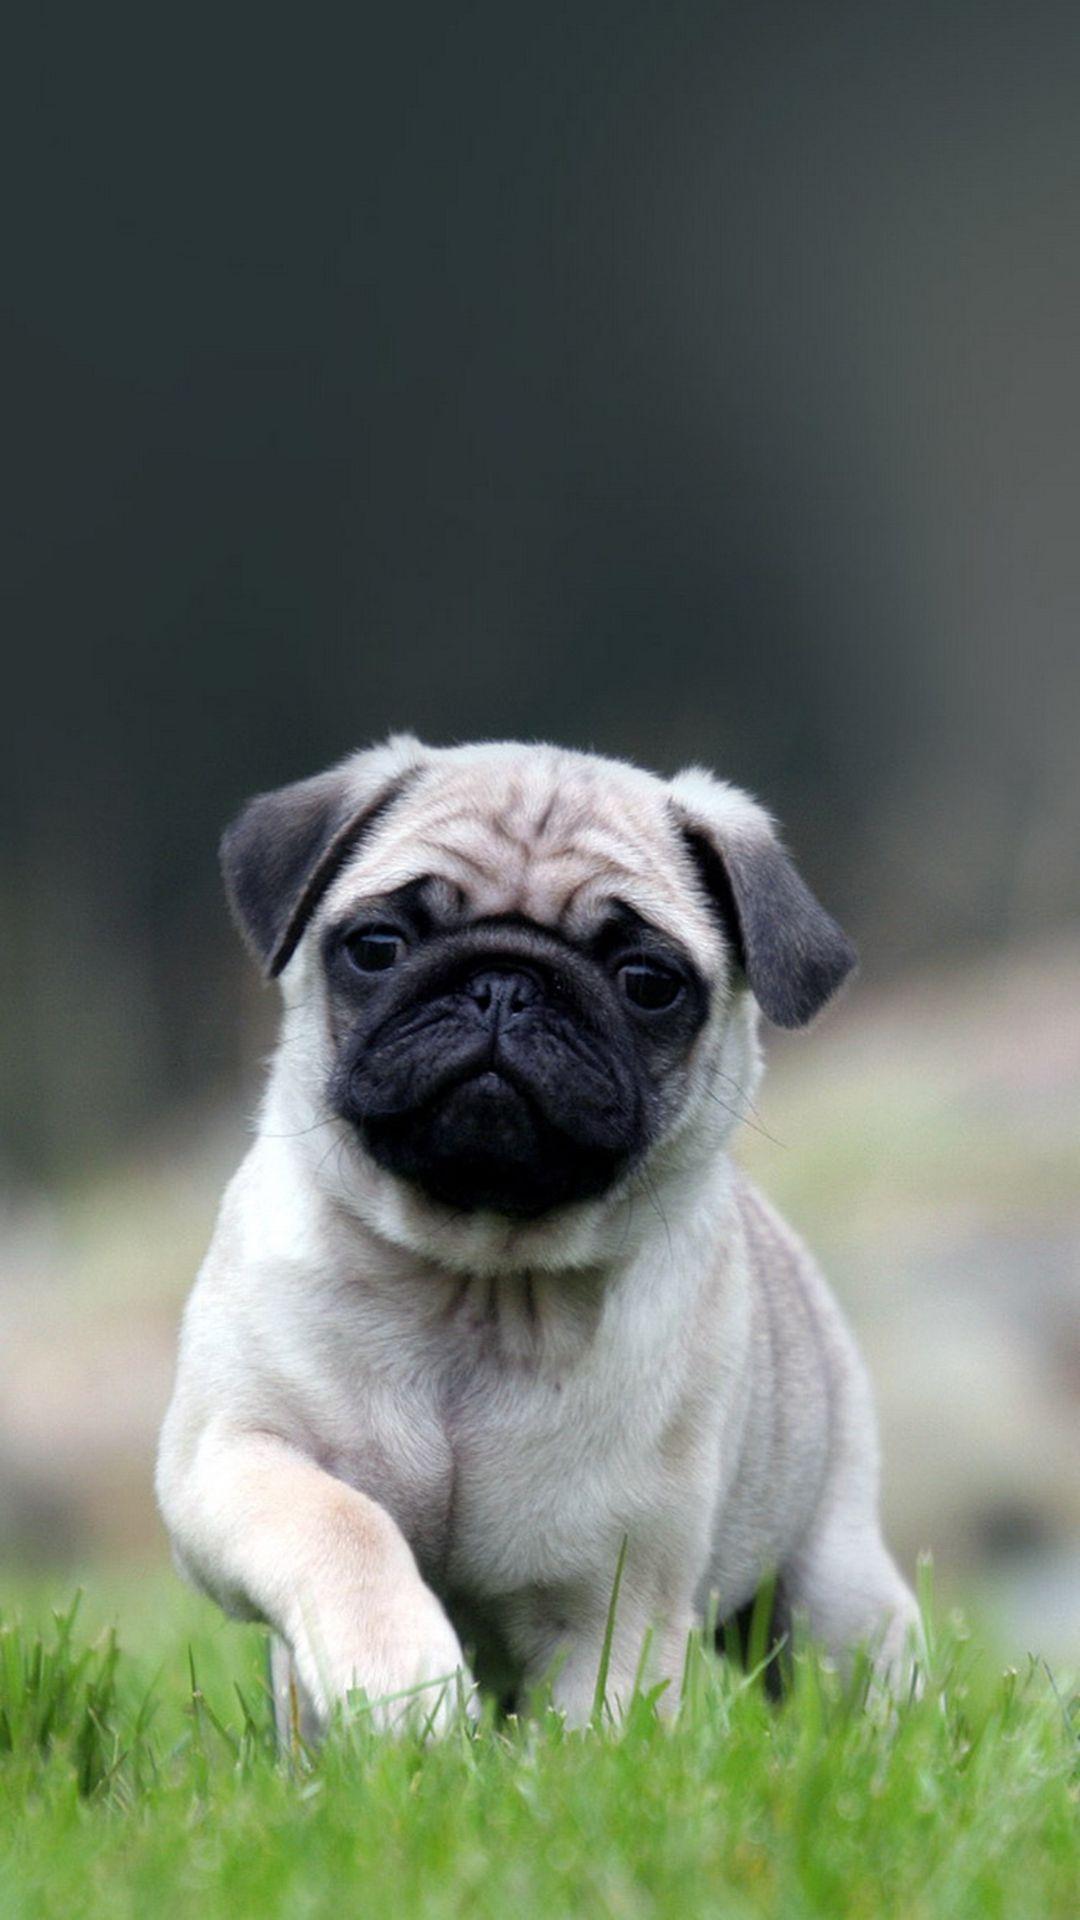 Cute Pug Dog In Grass iPhone 8 Wallpaper Free Download